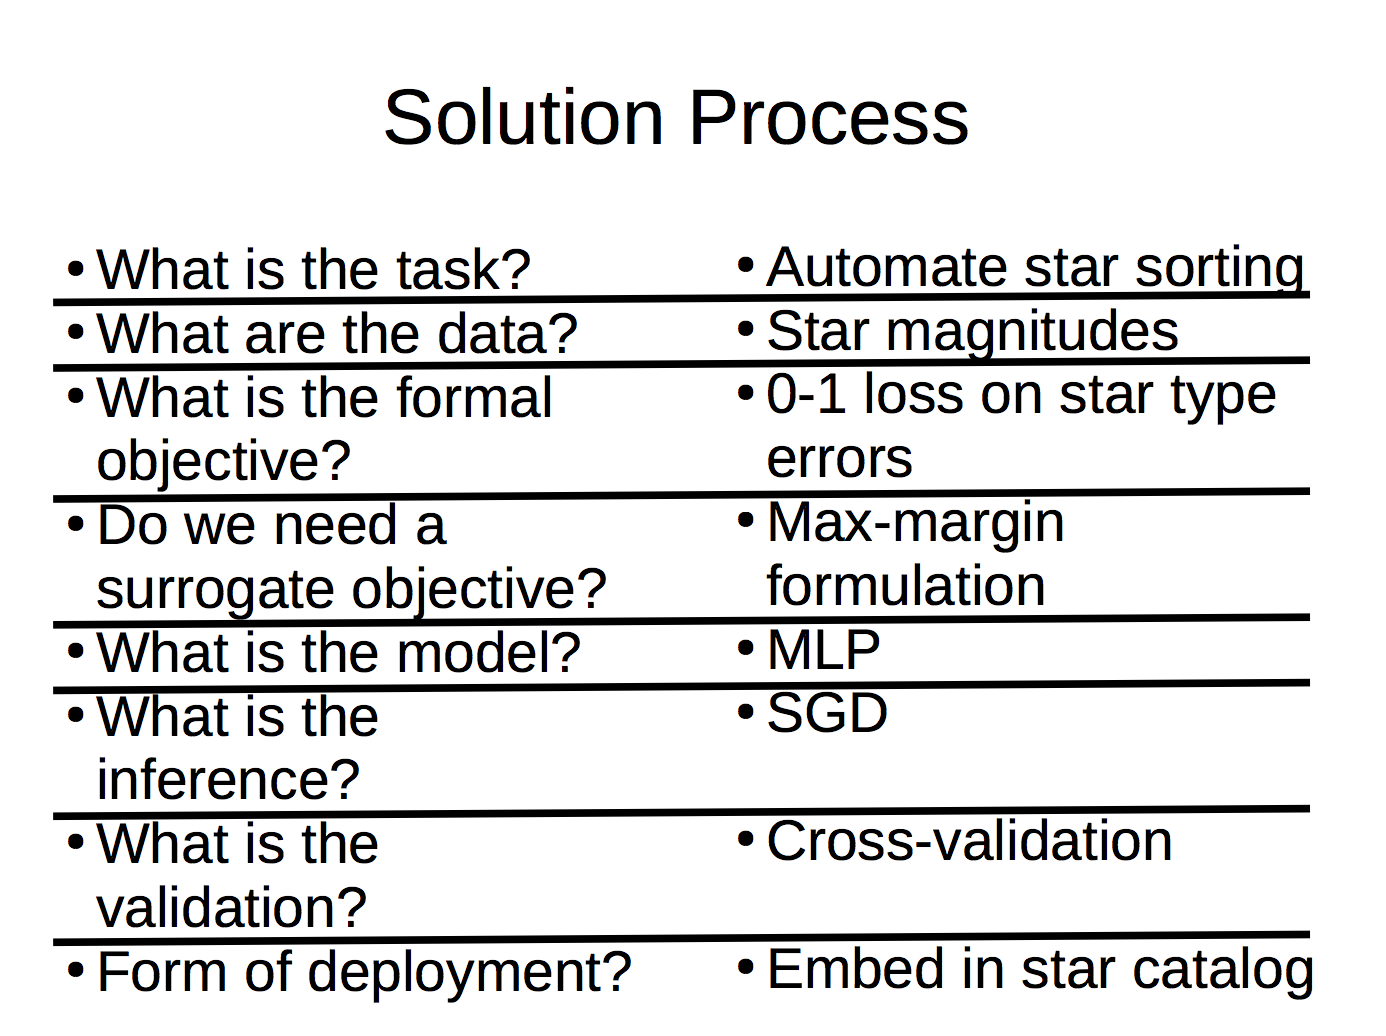 Solution Process Example